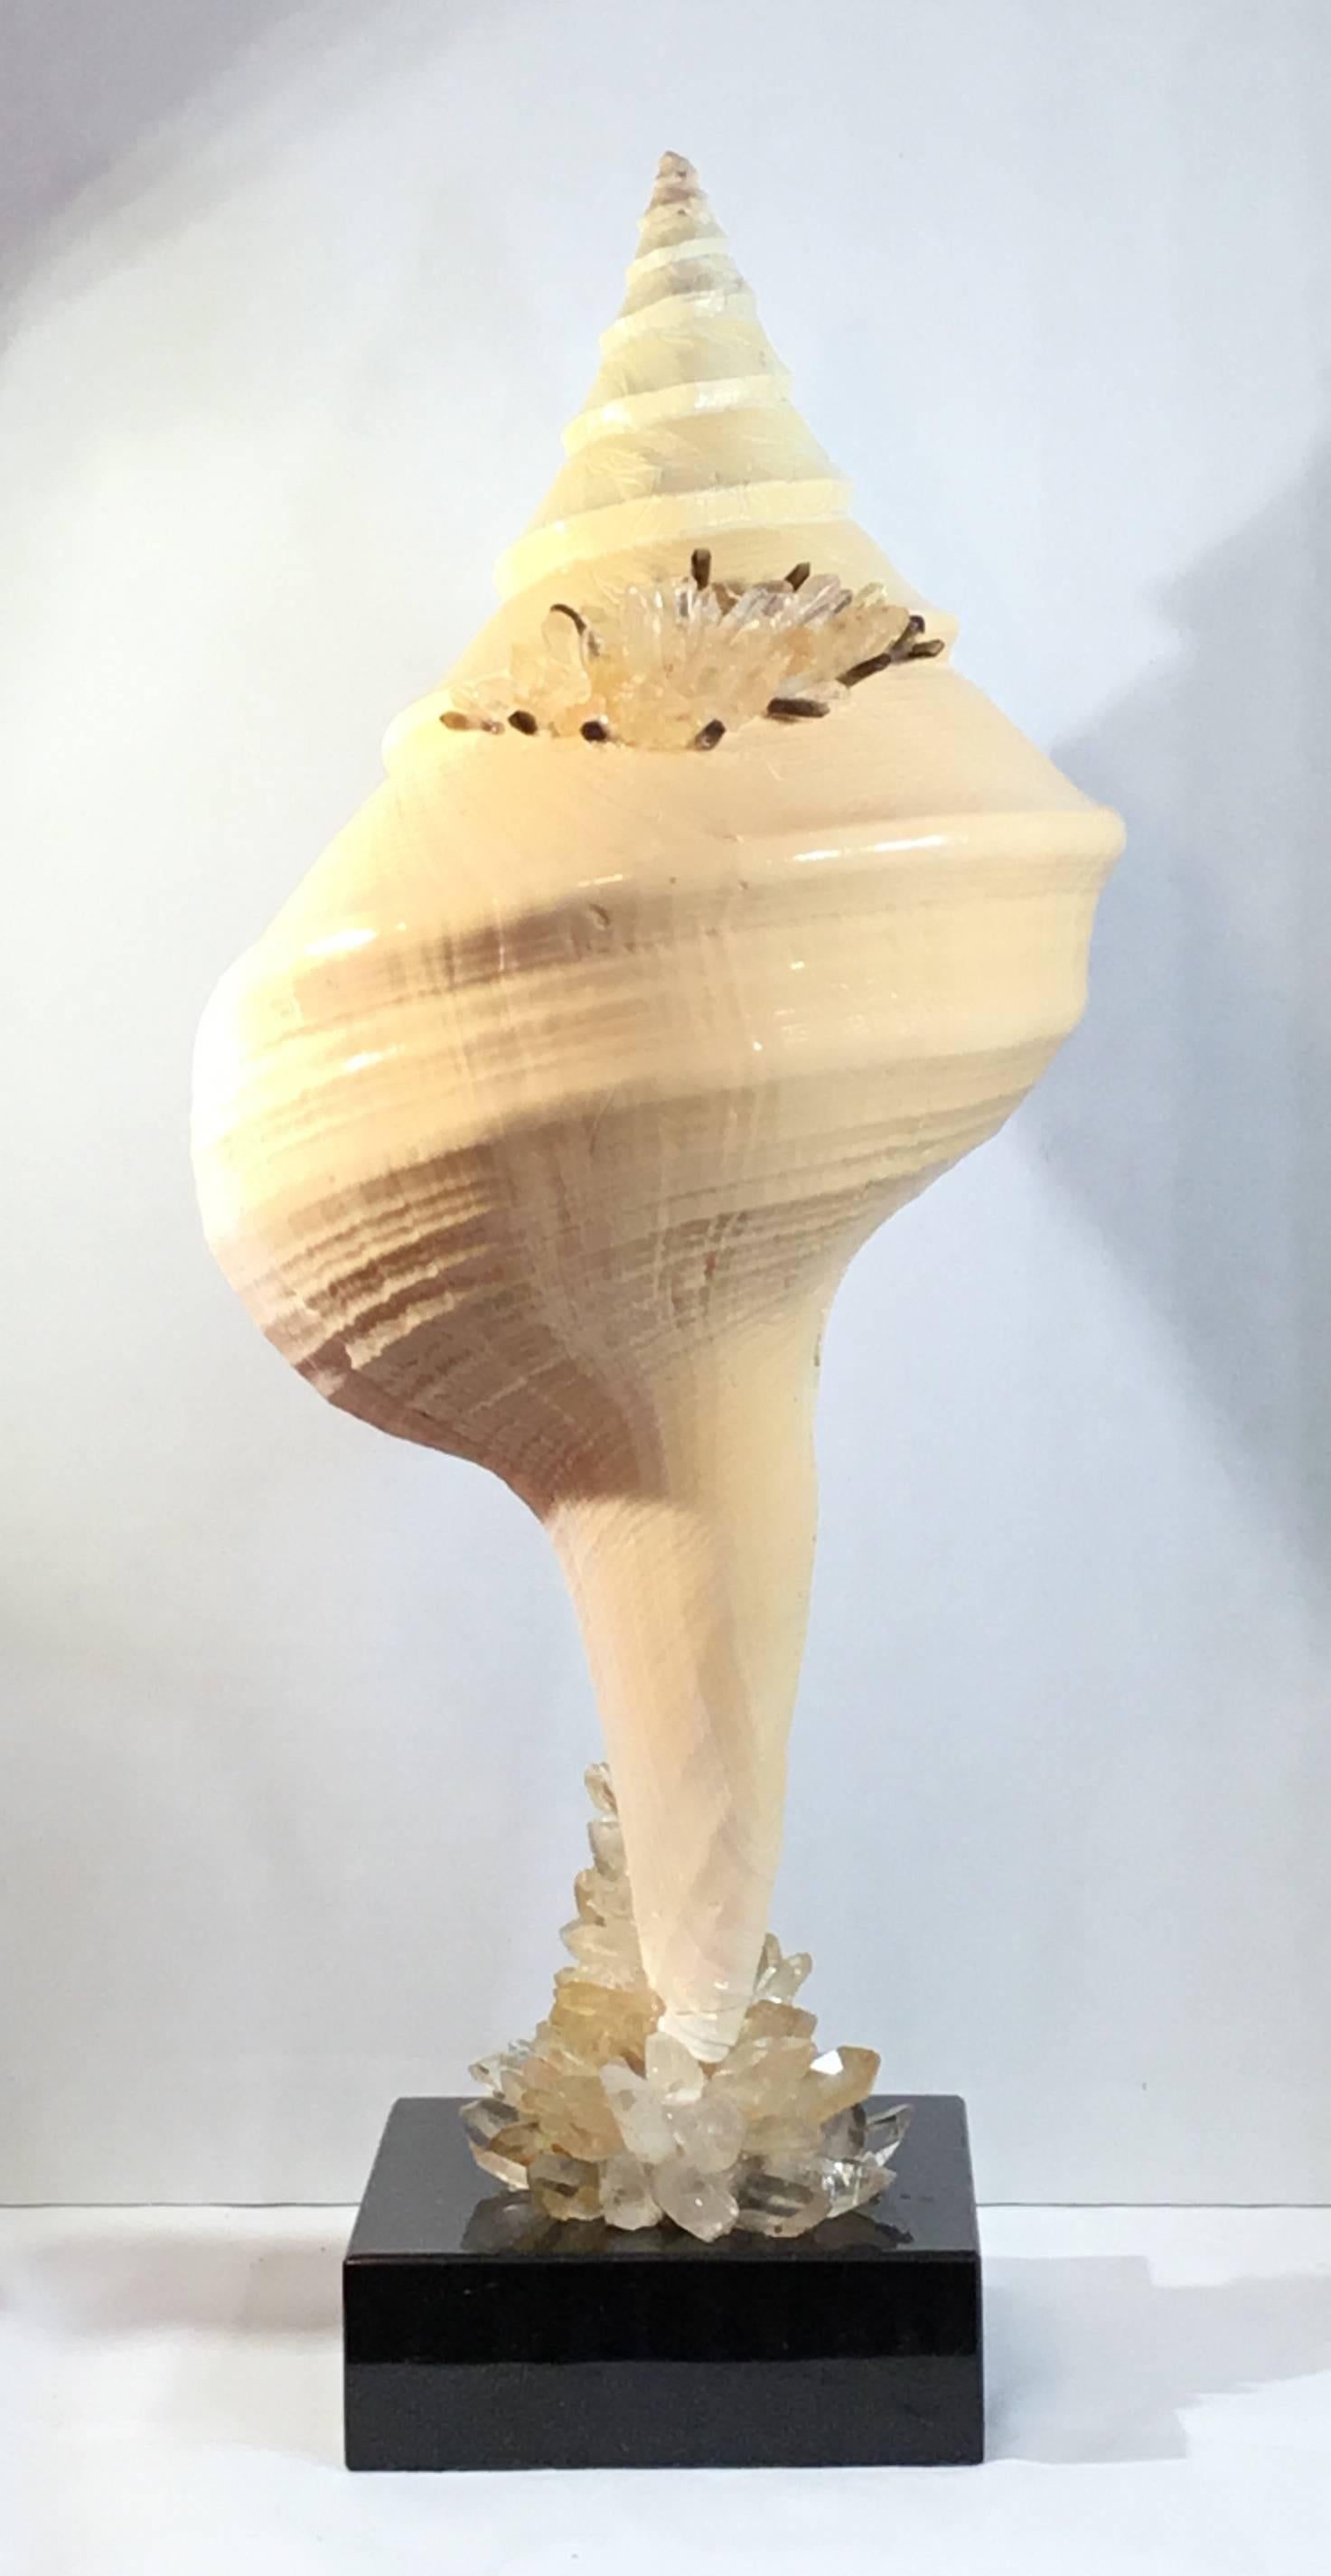 Elegant Atlantic trumpet sea shell professionally mounted on a black color marble base. Artistically hand embedded by the artist with crystal quartz pieces that make beautiful art object to display.